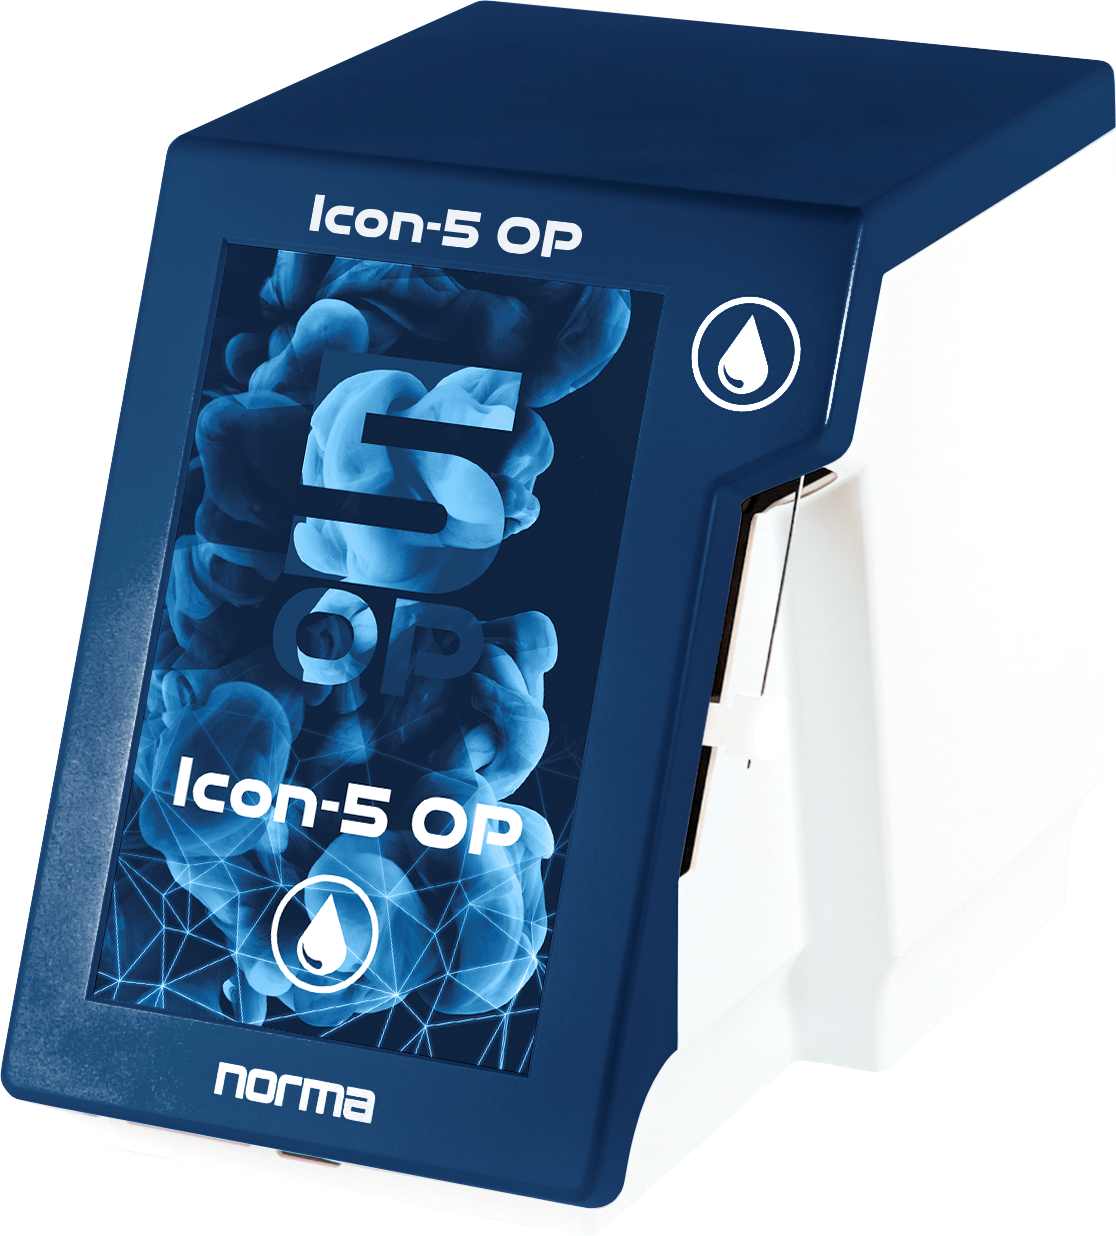 Norma Icon-5 OP, the smallest laser-based 5-diff hematology analyzer with open vial sampling